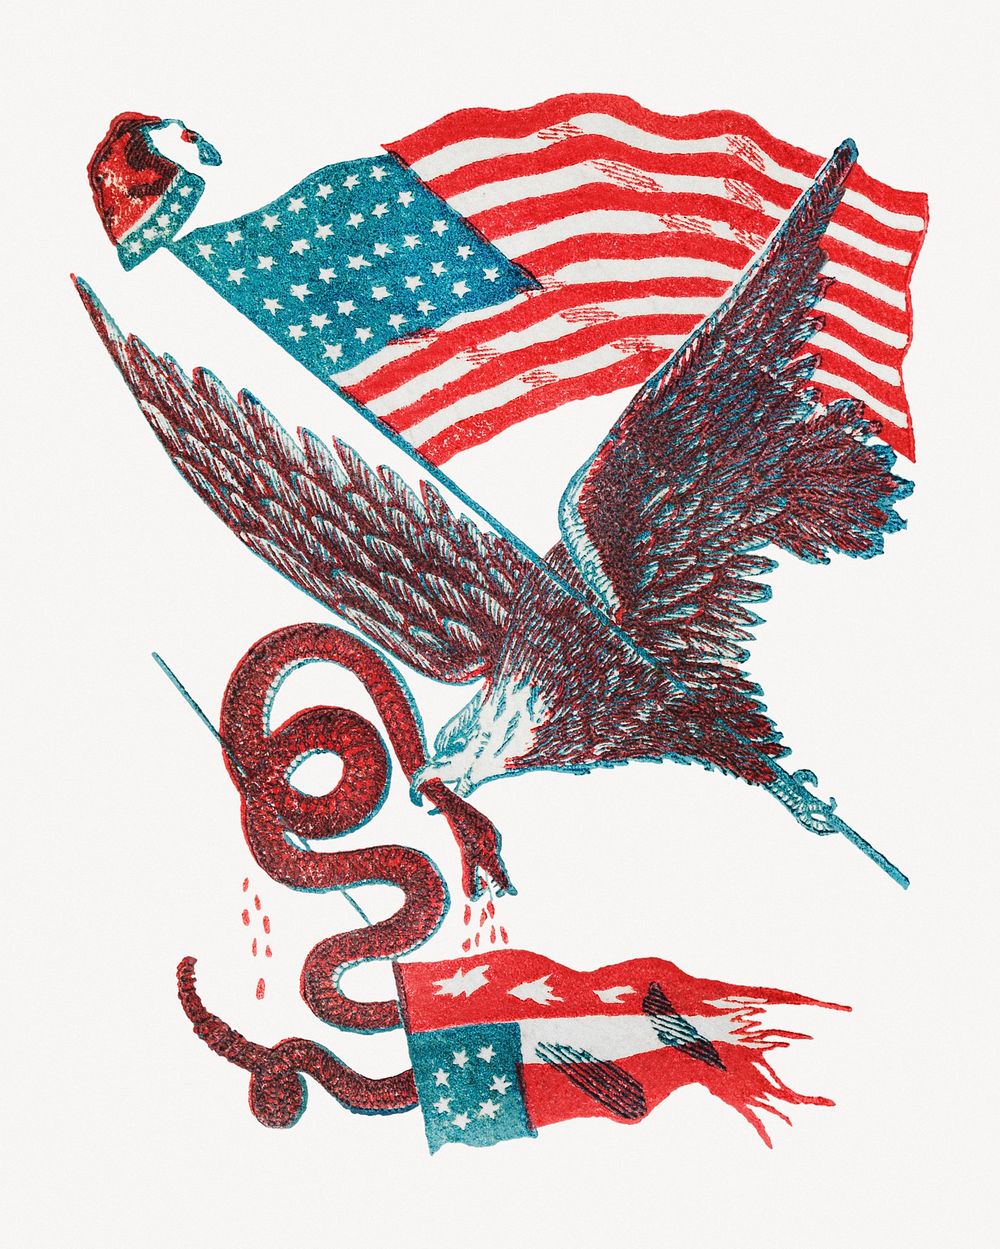 Vintage eagle carrying an American flag illustration psd